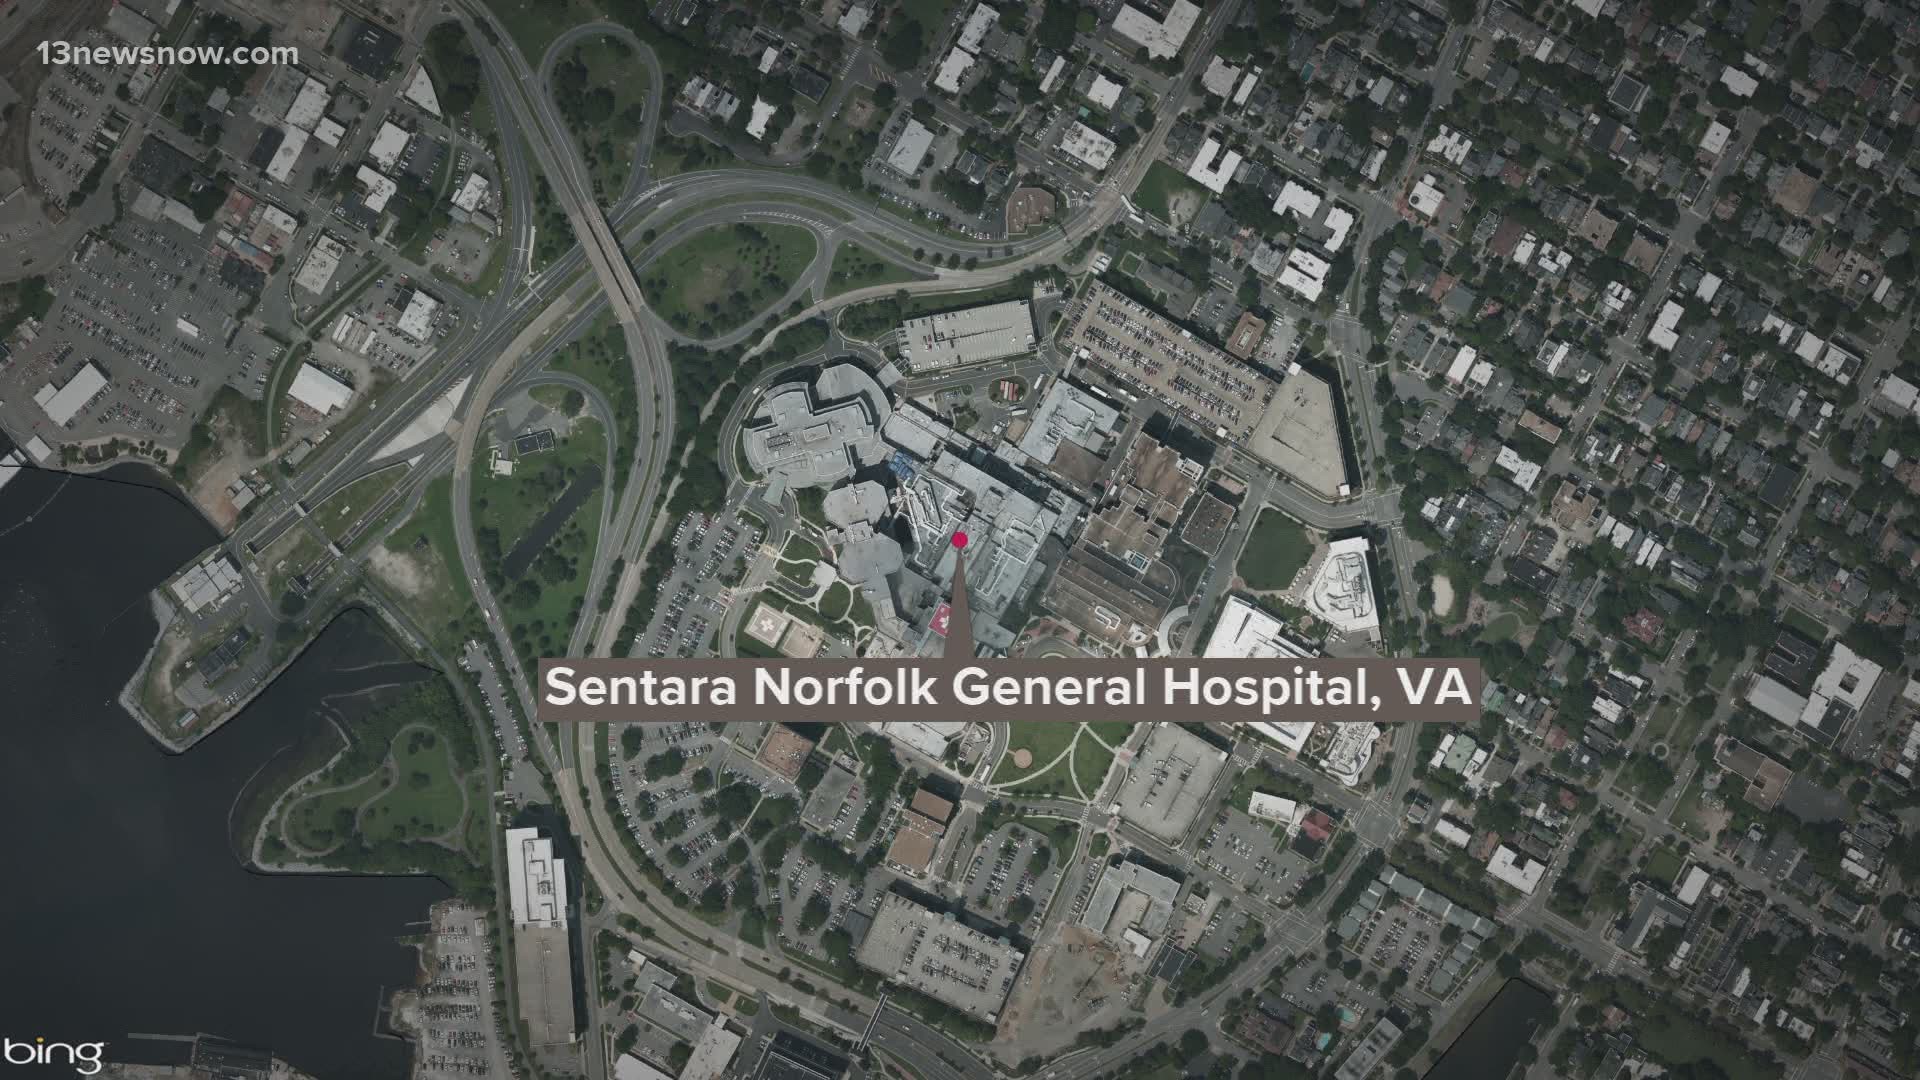 Two gunshot victims walked into Sentara Norfolk General Hospital. Their injuries are not considered life-threatening.